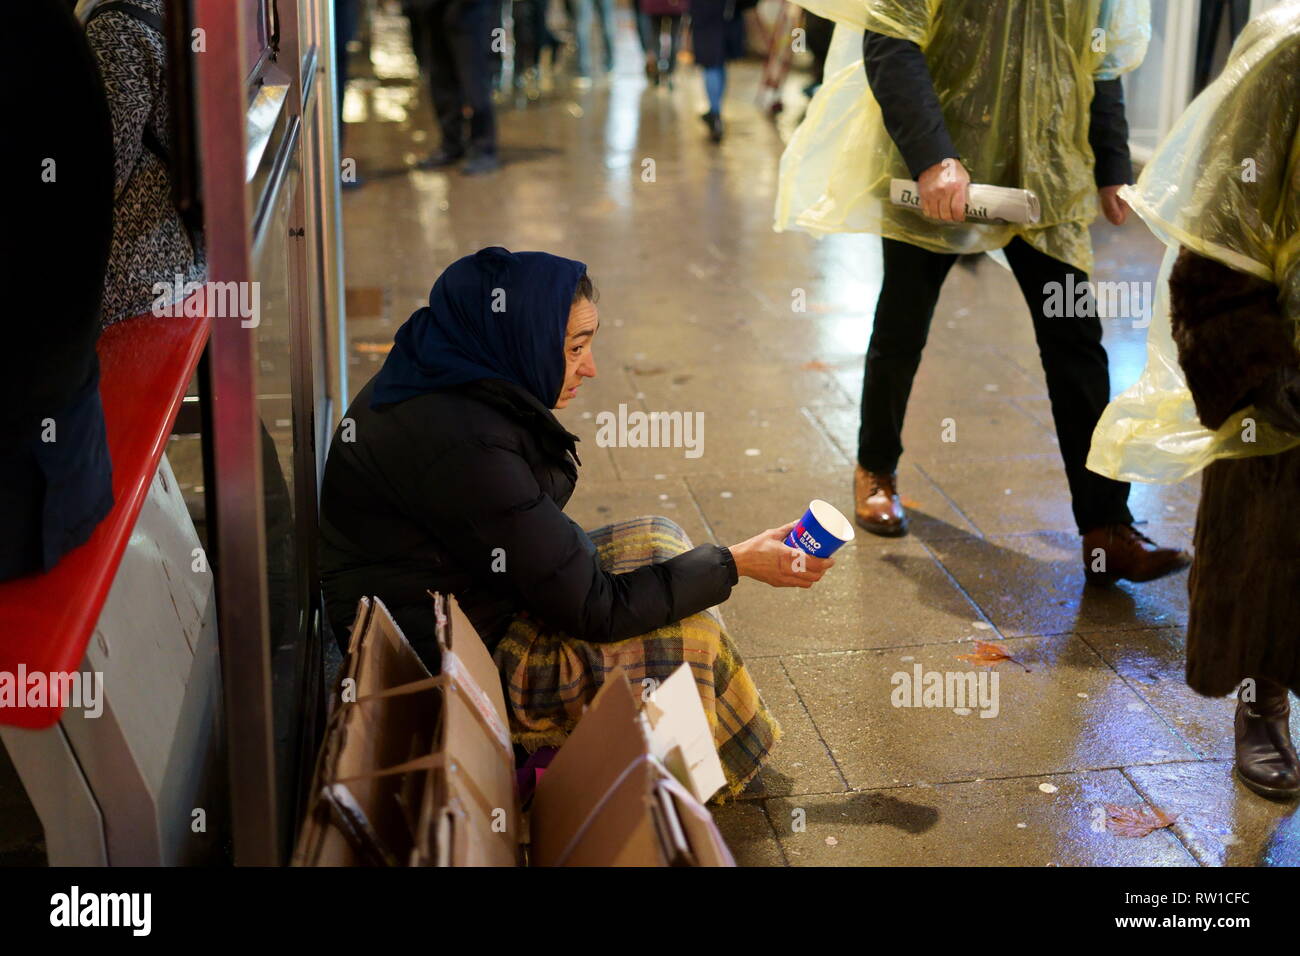 Homeless lady in London, sitting next to a bus stop as people walk passed her. Stock Photo